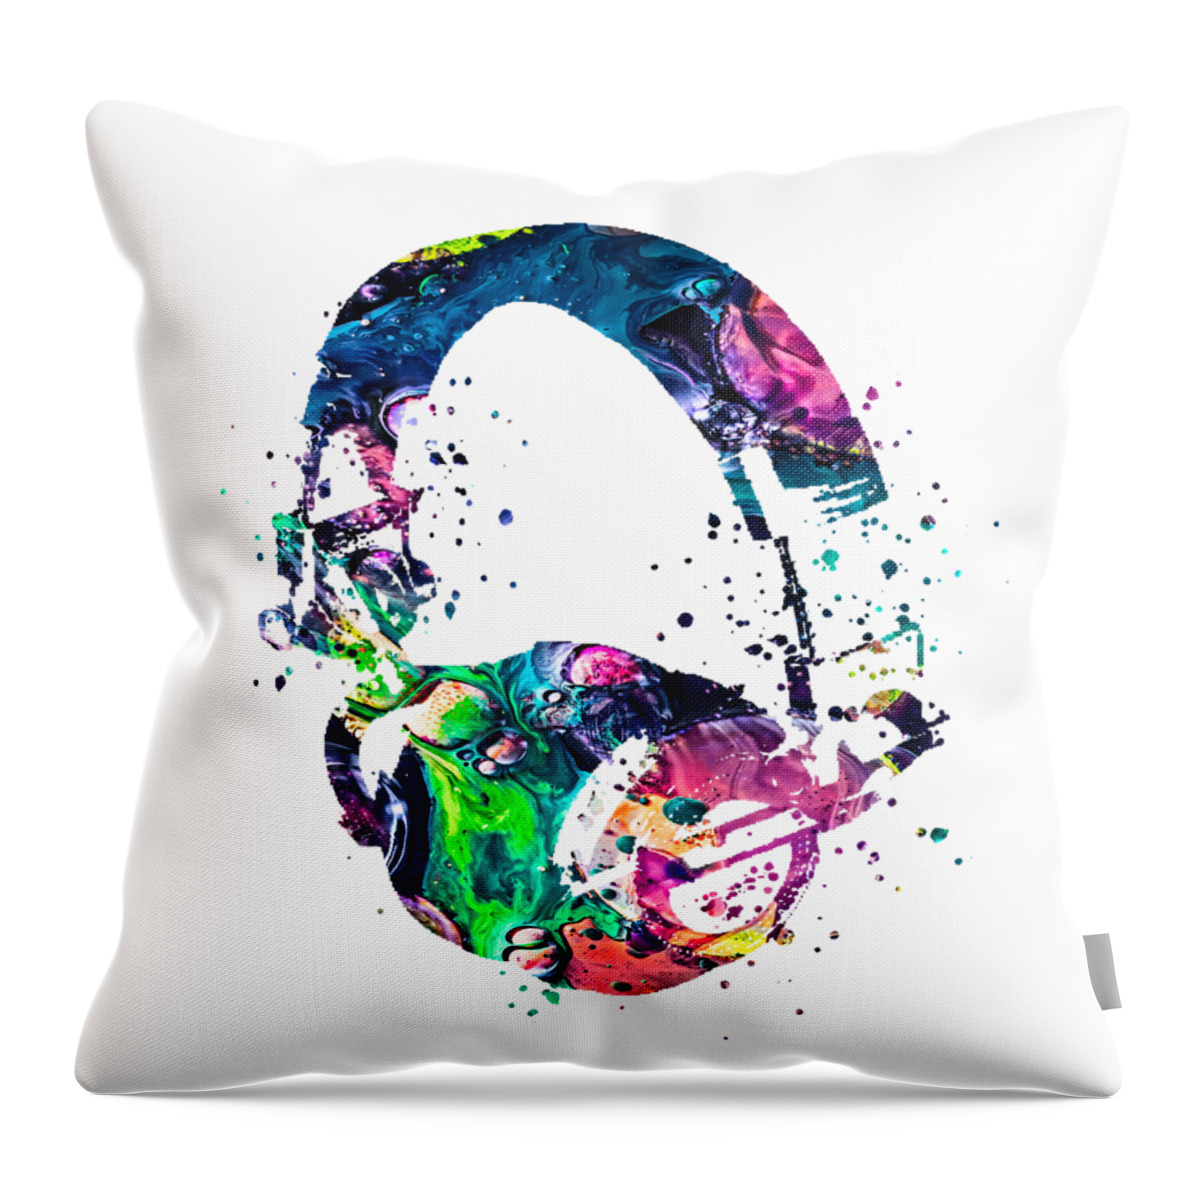 Headphones Throw Pillow featuring the painting Headphones by Zuzi 's